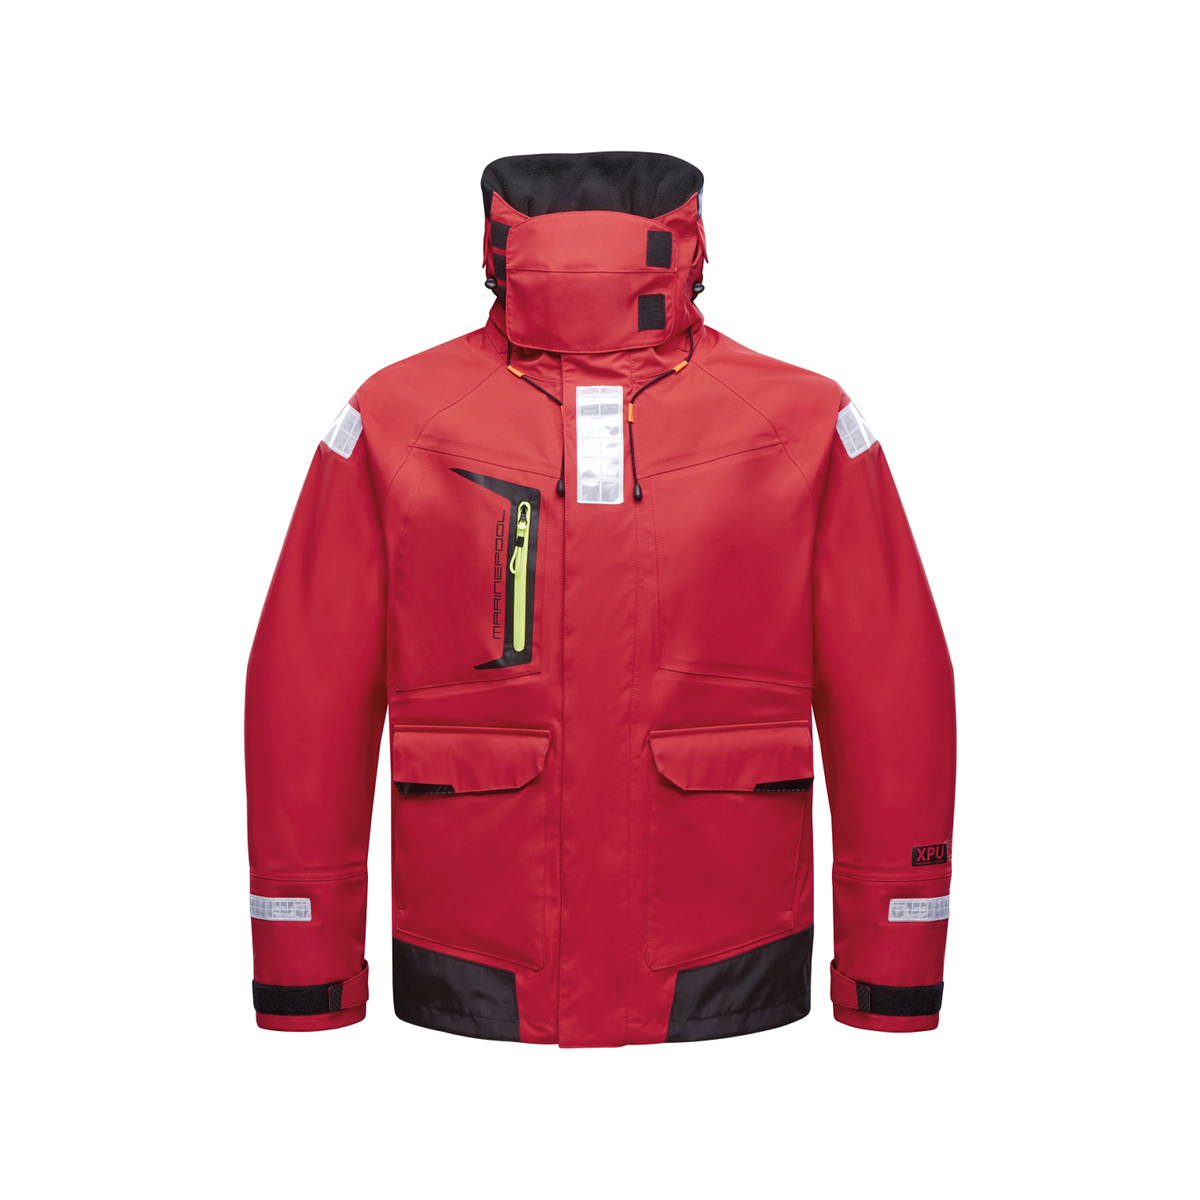 Marinepool Fortuna 2.0 veste de voile Offshore homme rouge, taille M